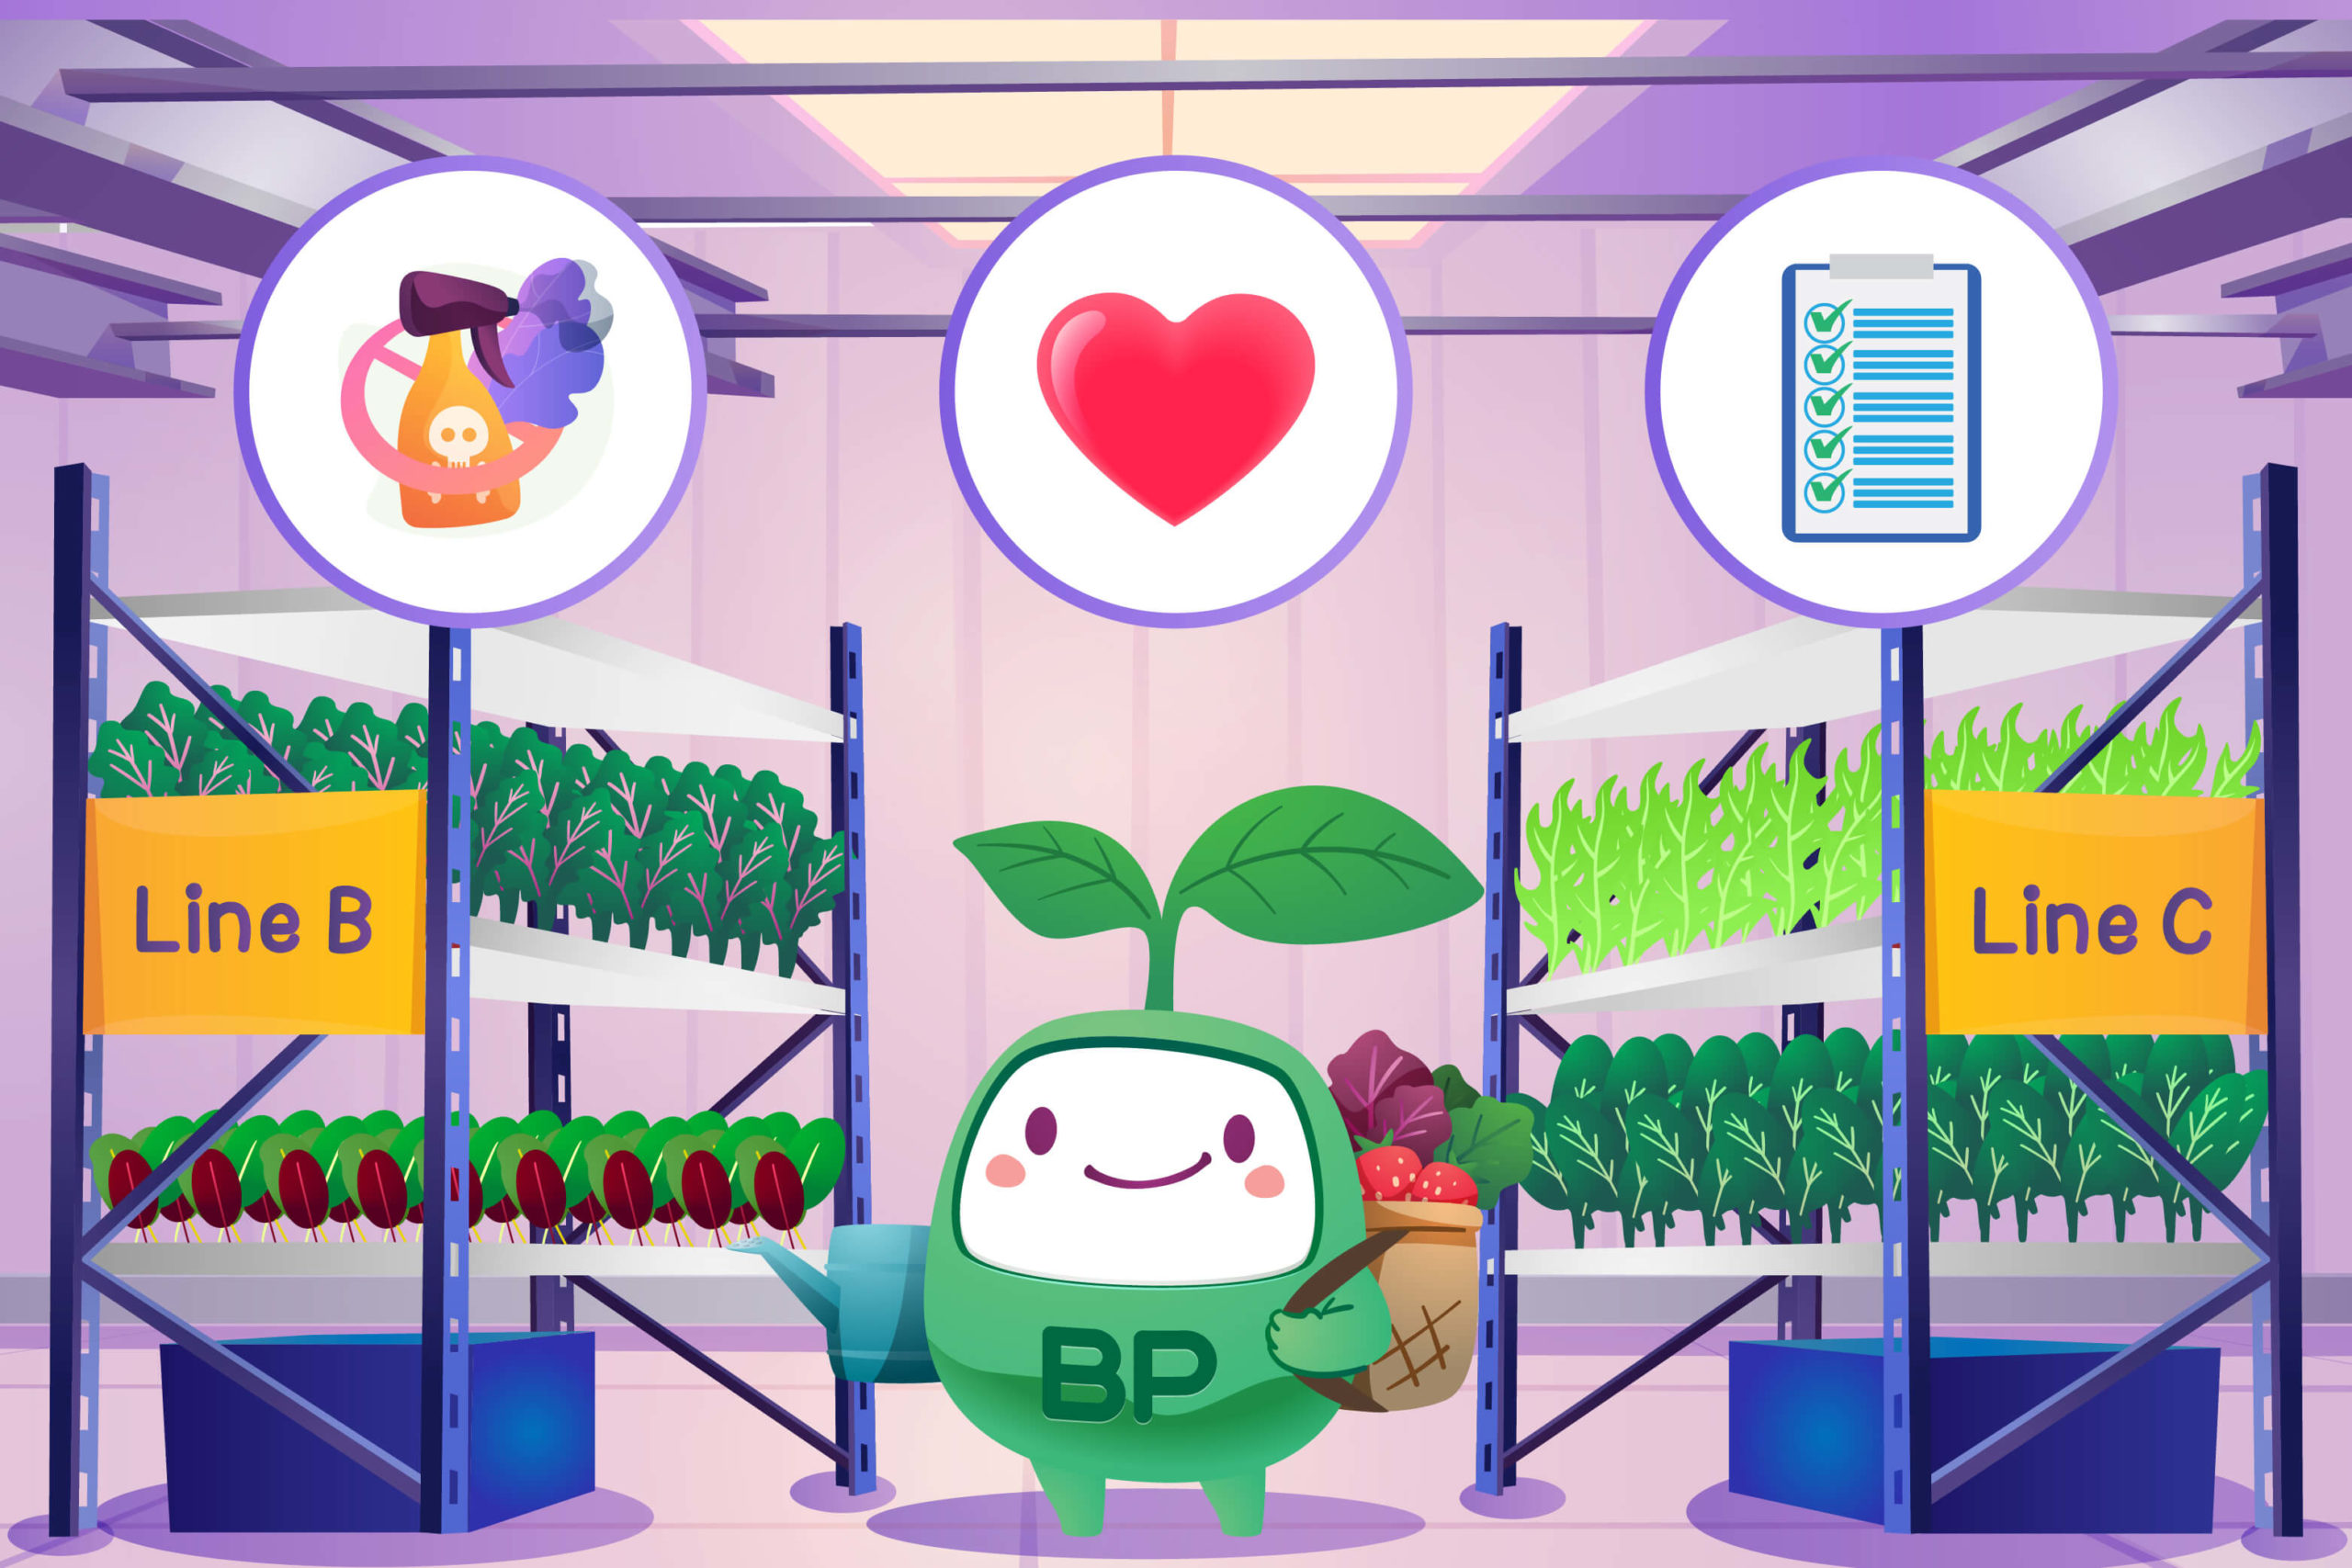 BP Value, no pesticide and growing with heart